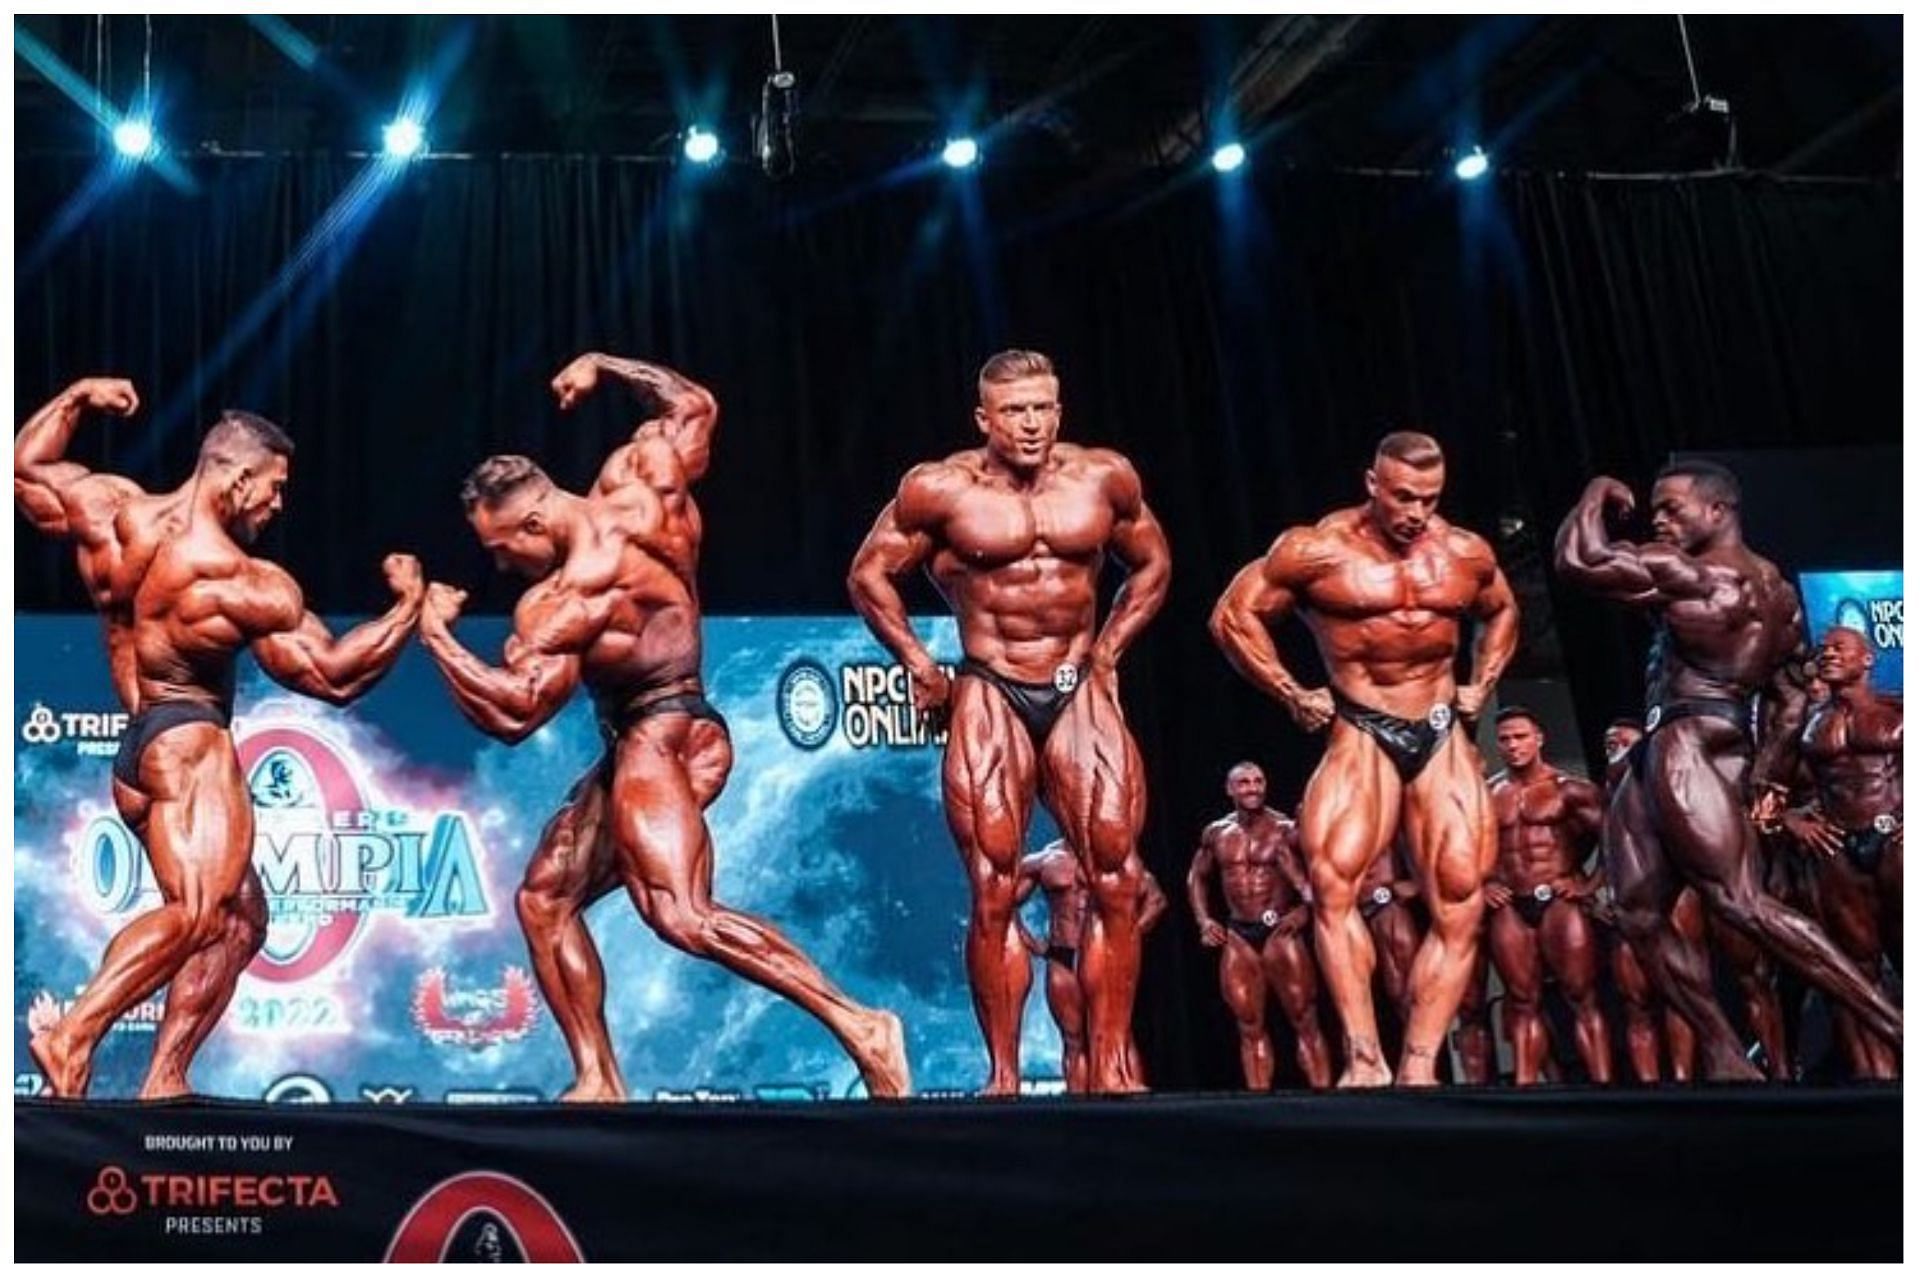 (L-R) Ramon Dino, Chris Bumstead and Urs Kalecinski pose on stage at the 2022 Mr. Olympia: Image via Instagram (@mrolympiallc)